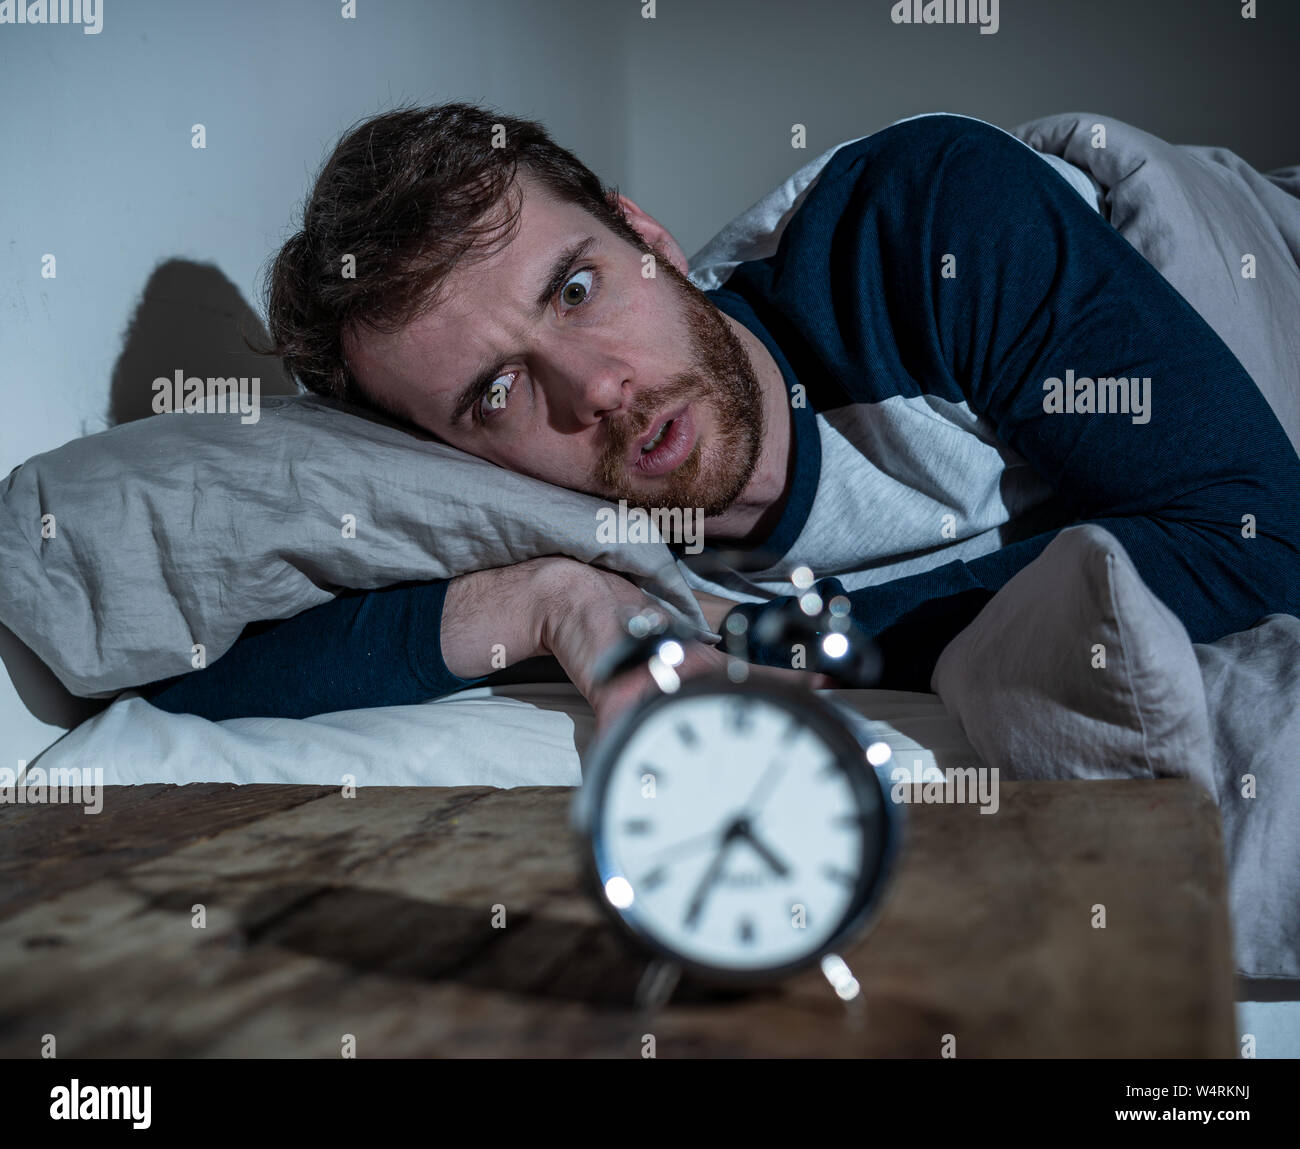 Insomnia Stress and Sleeping disorder concept. Sleepless desperate young caucasian man awake at night not able to sleep, feeling frustrated and worrie Stock Photo